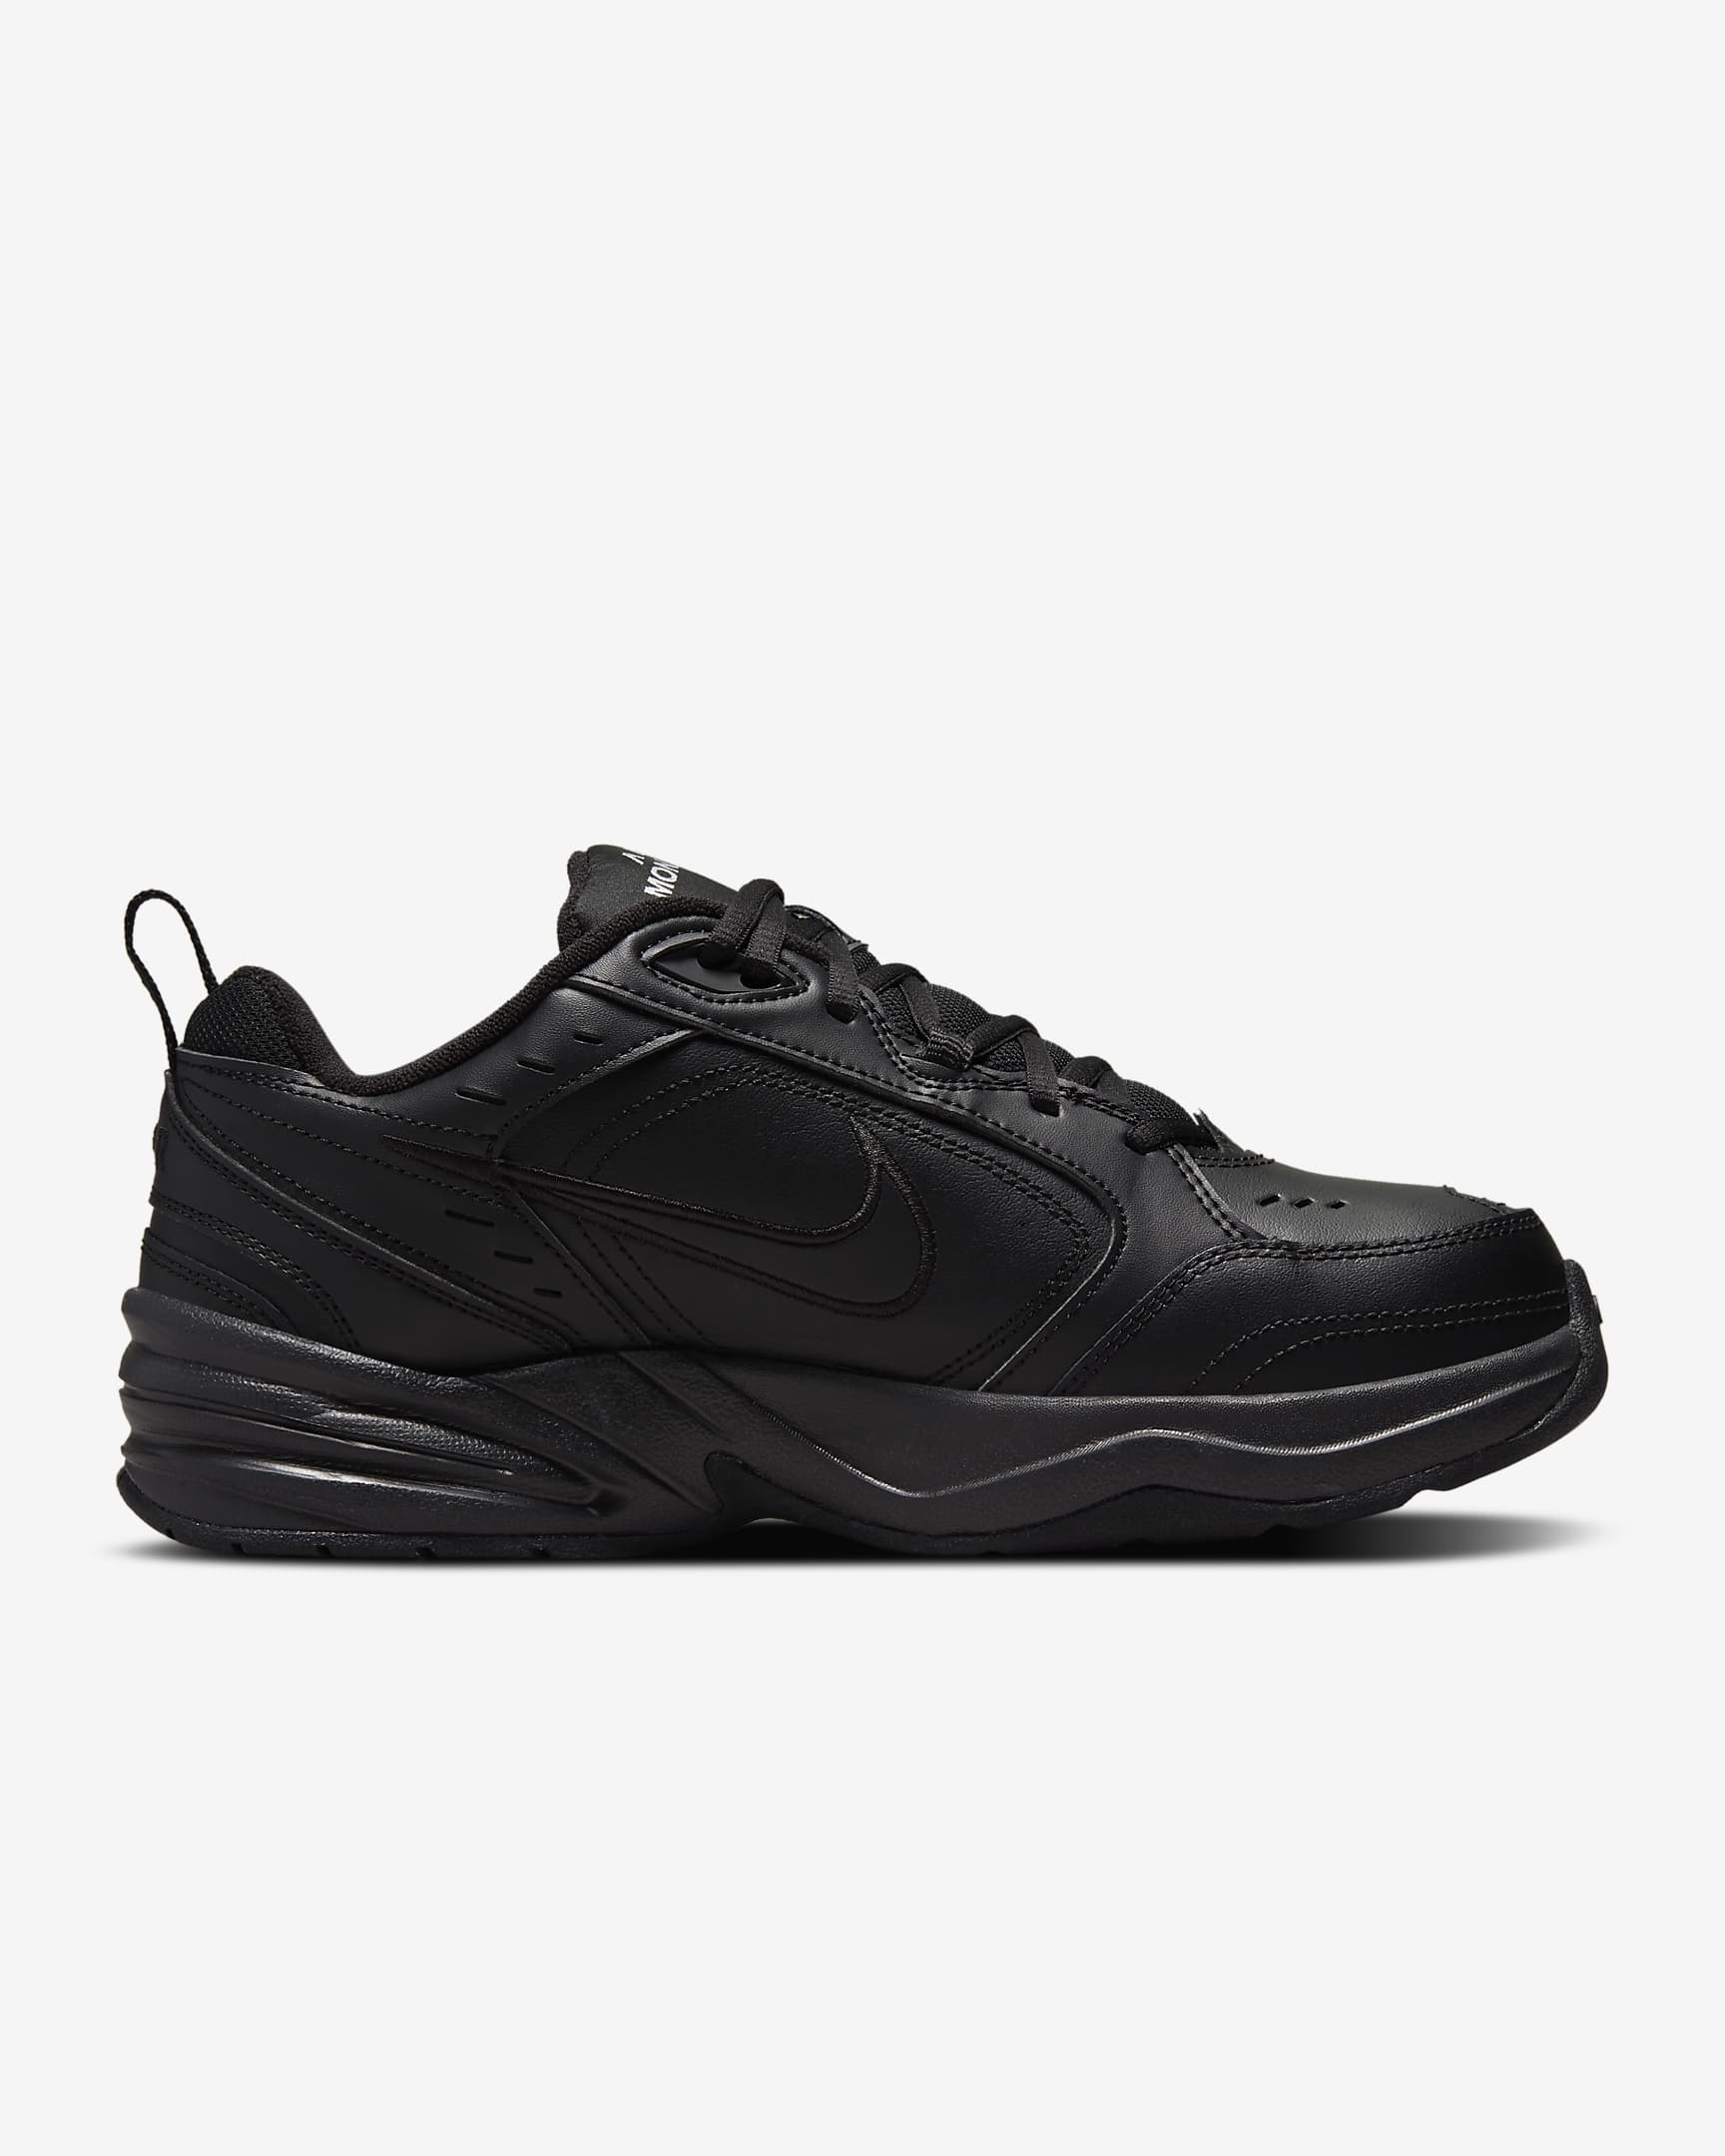 Nike Air Monarch IV Men's Workout Shoes (Extra Wide). Nike.com